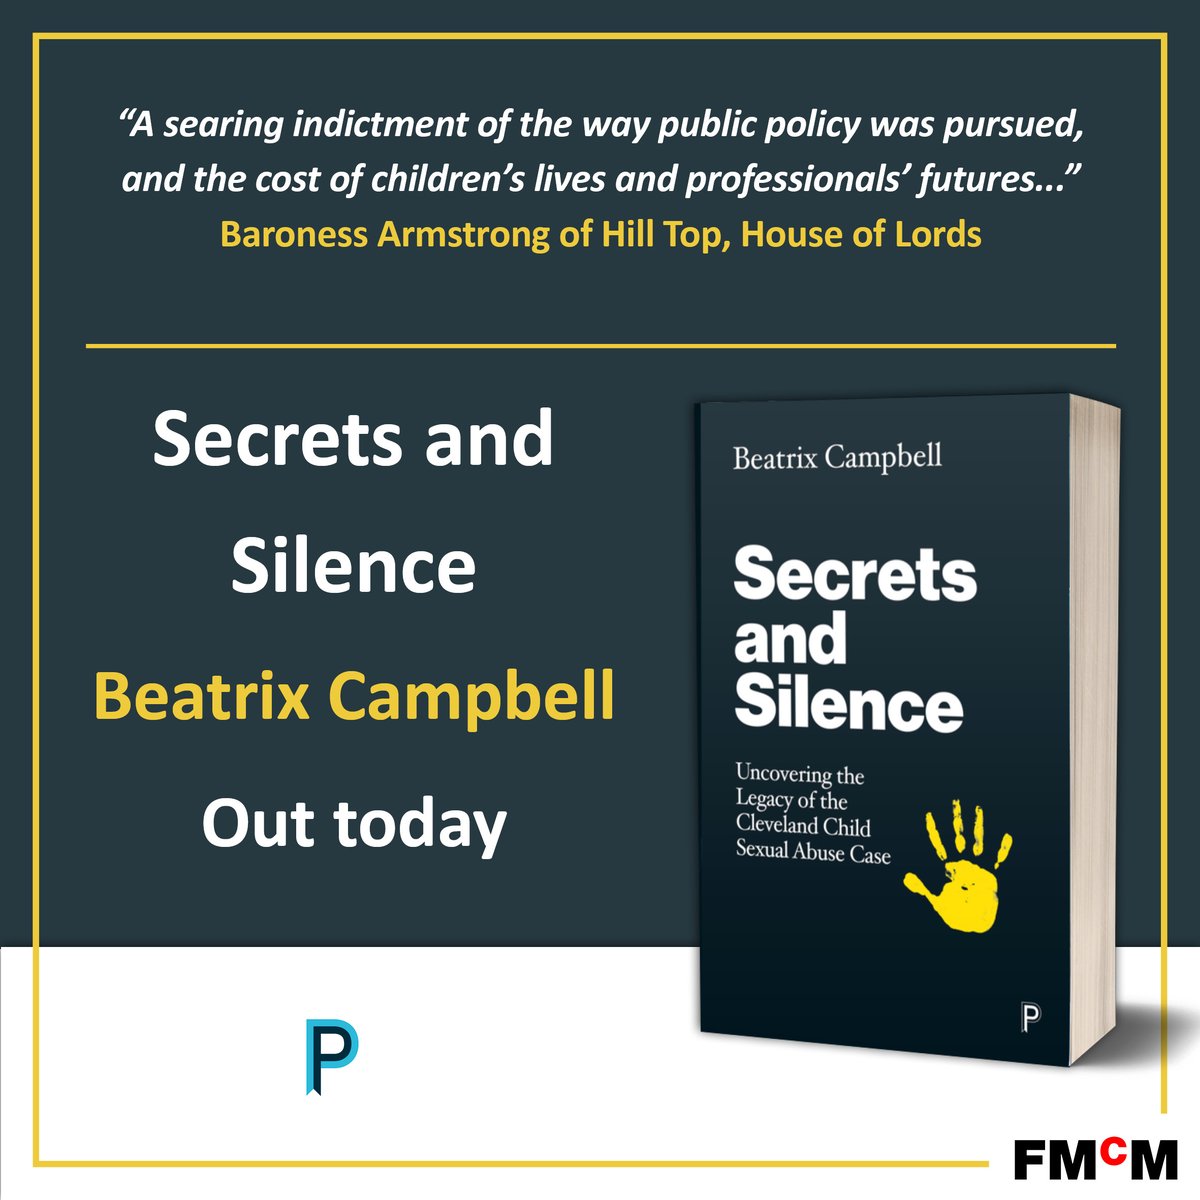 Congratulations to @BeatrixCampbell on publication day for #SecretsAndSilence.

“A searing indictment of the way public policy was pursued” - Baroness Armstrong of Hill Top, House of Lords

Published by @PolicyPress. Buy your copy here: policy.bristoluniversitypress.co.uk/secrets-and-si…